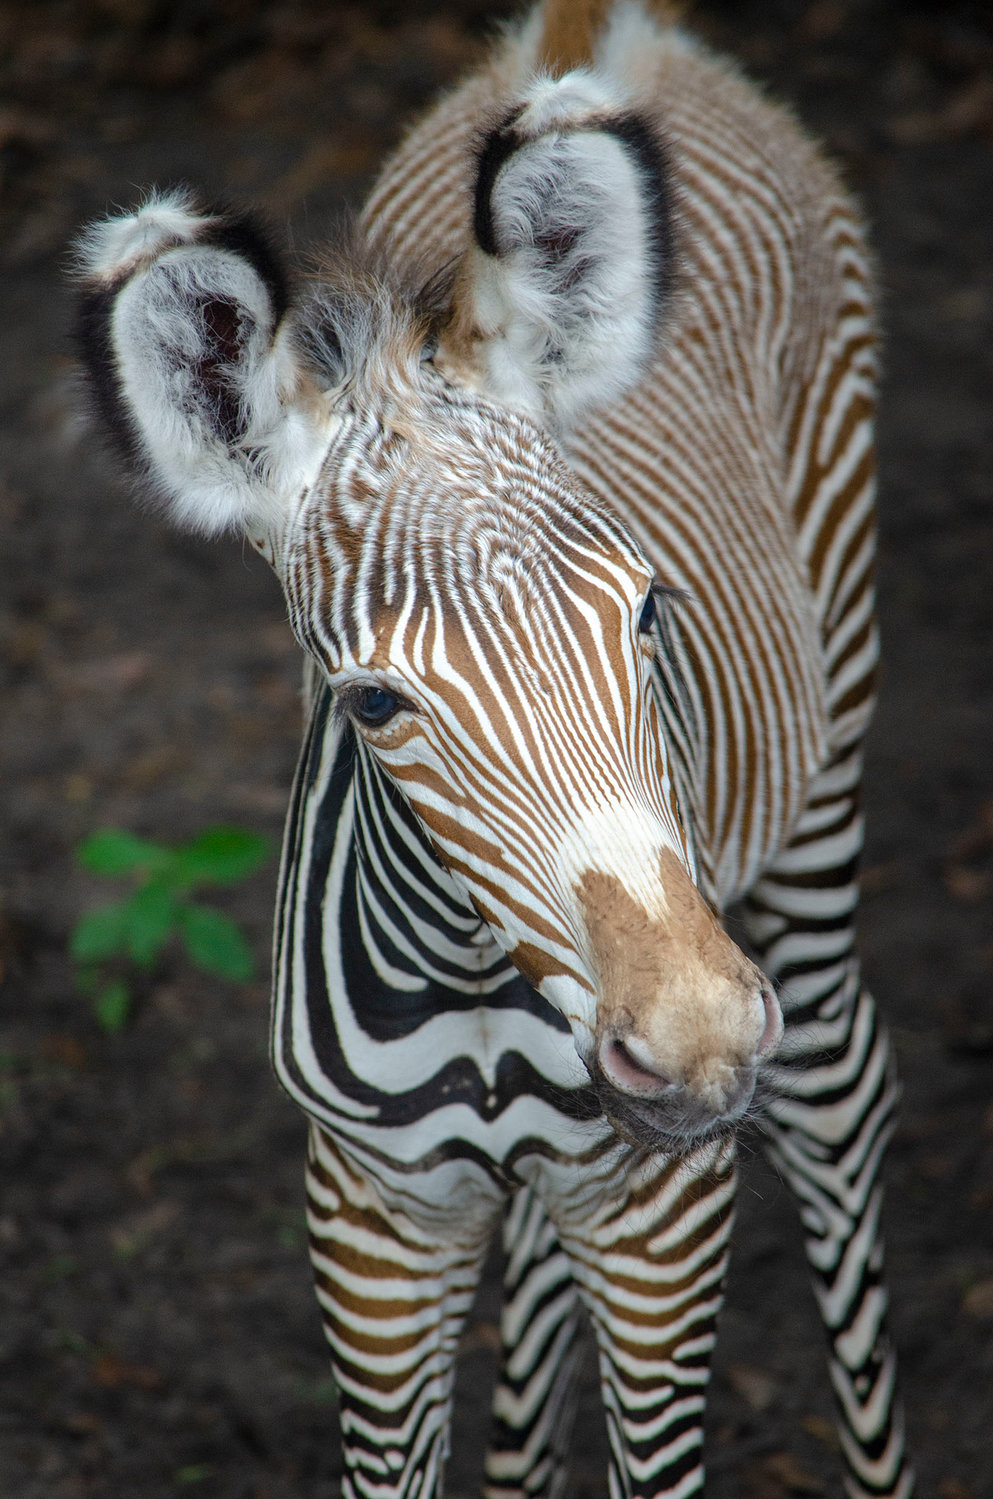 The Jacksonville Zoo and Gardens welcomed a healthy baby Grevy’s Zebra born early Sunday, July 7.